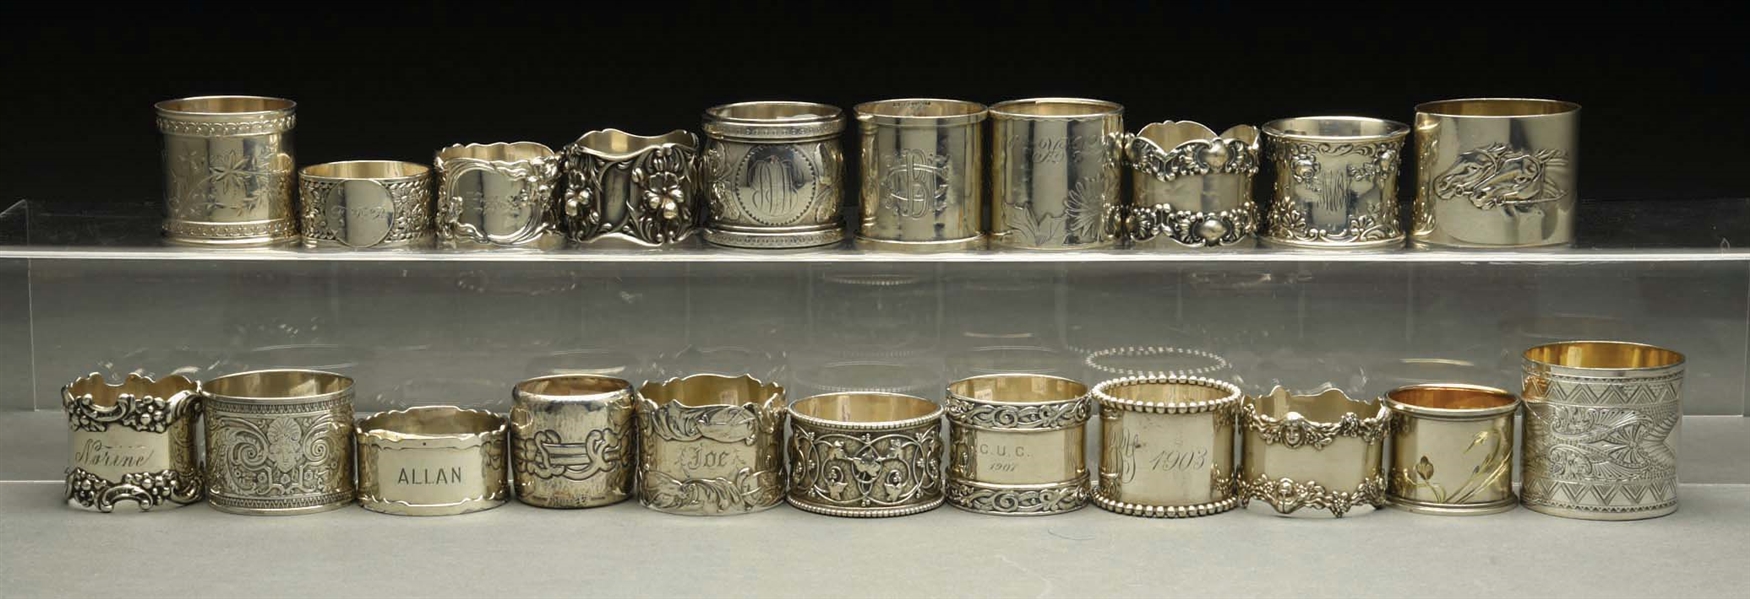 LOT OF 21: STERLING SILVER NAPKIN RINGS. 